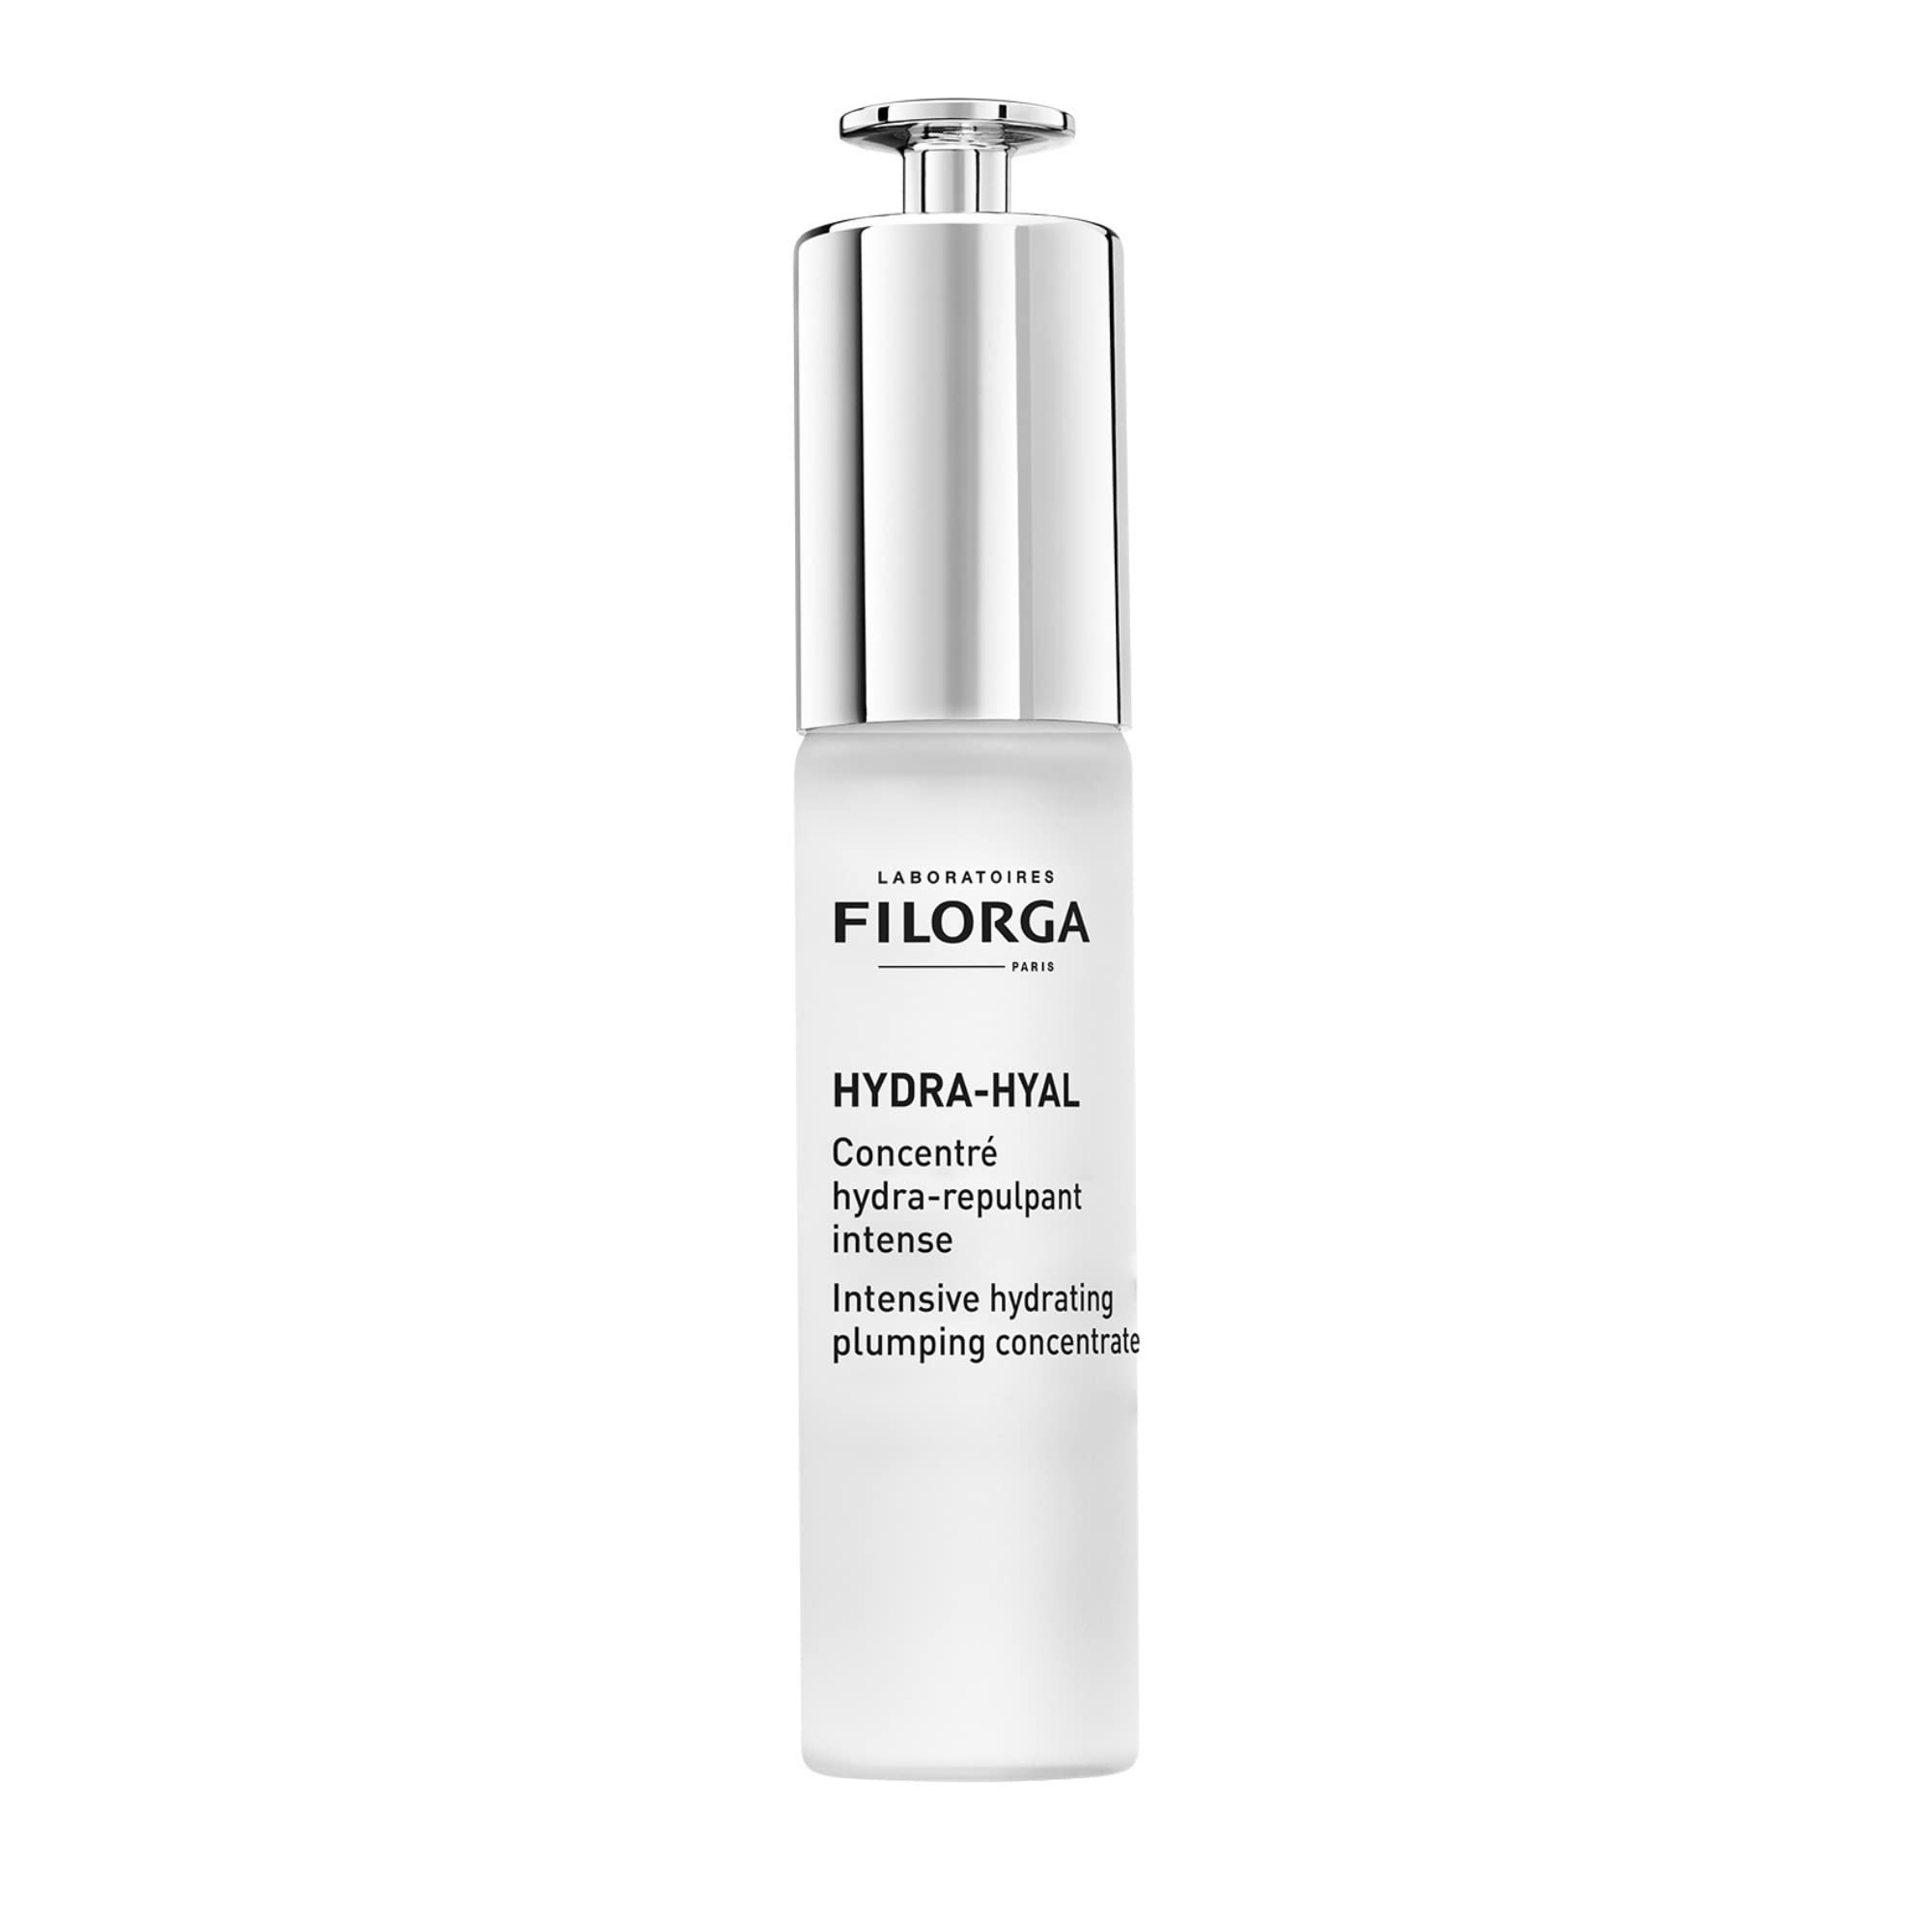 Filorga Hydra Hyal femme/women, Intensive Hydrating Plumping Concentrate, 1er Pack (1 x 30 ml) frisch